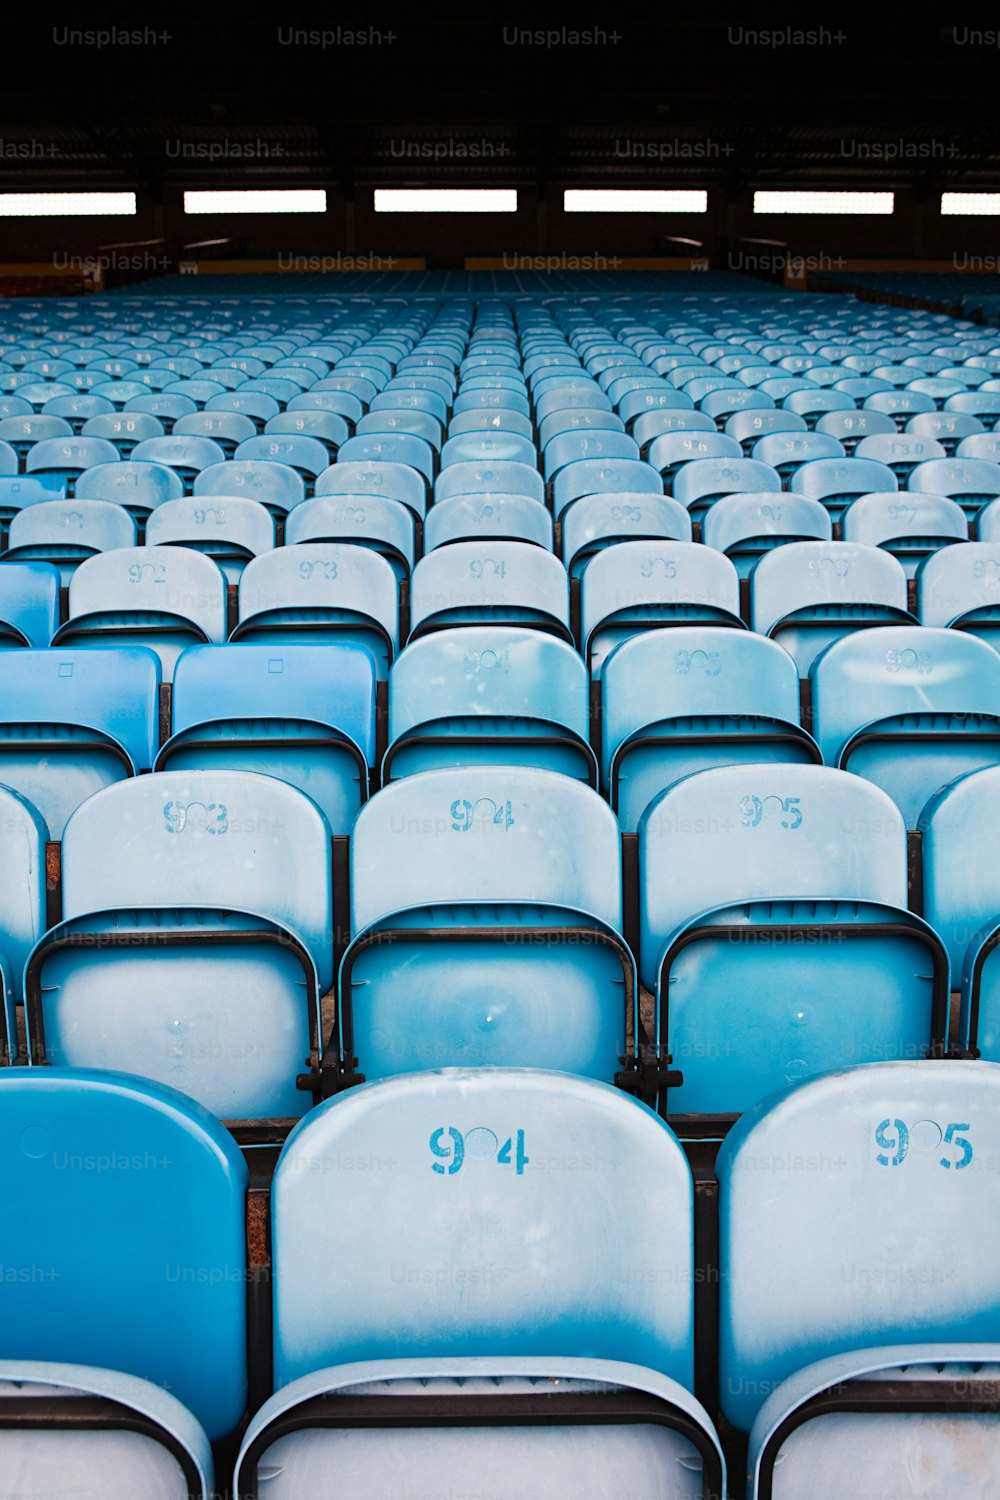 rows of blue and white seats in a stadium